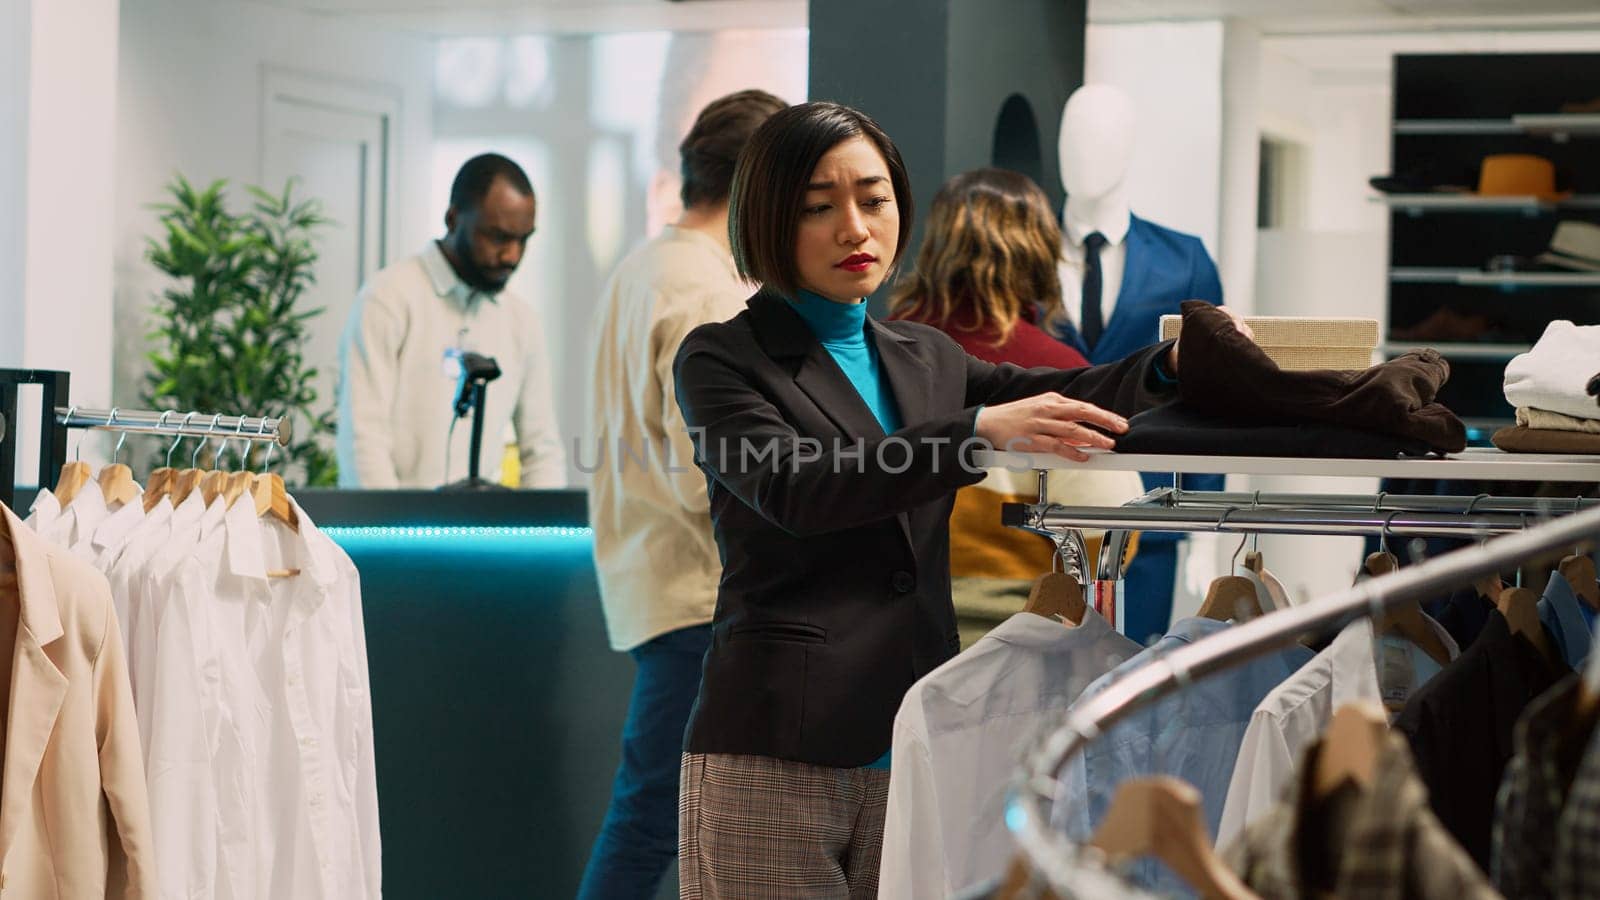 Asian woman shopping in fashionable clothing store, looking at formal and casual wear on hangers. Female customer buying trendy merchandise from shopping center, retail shop. Tripod shot.